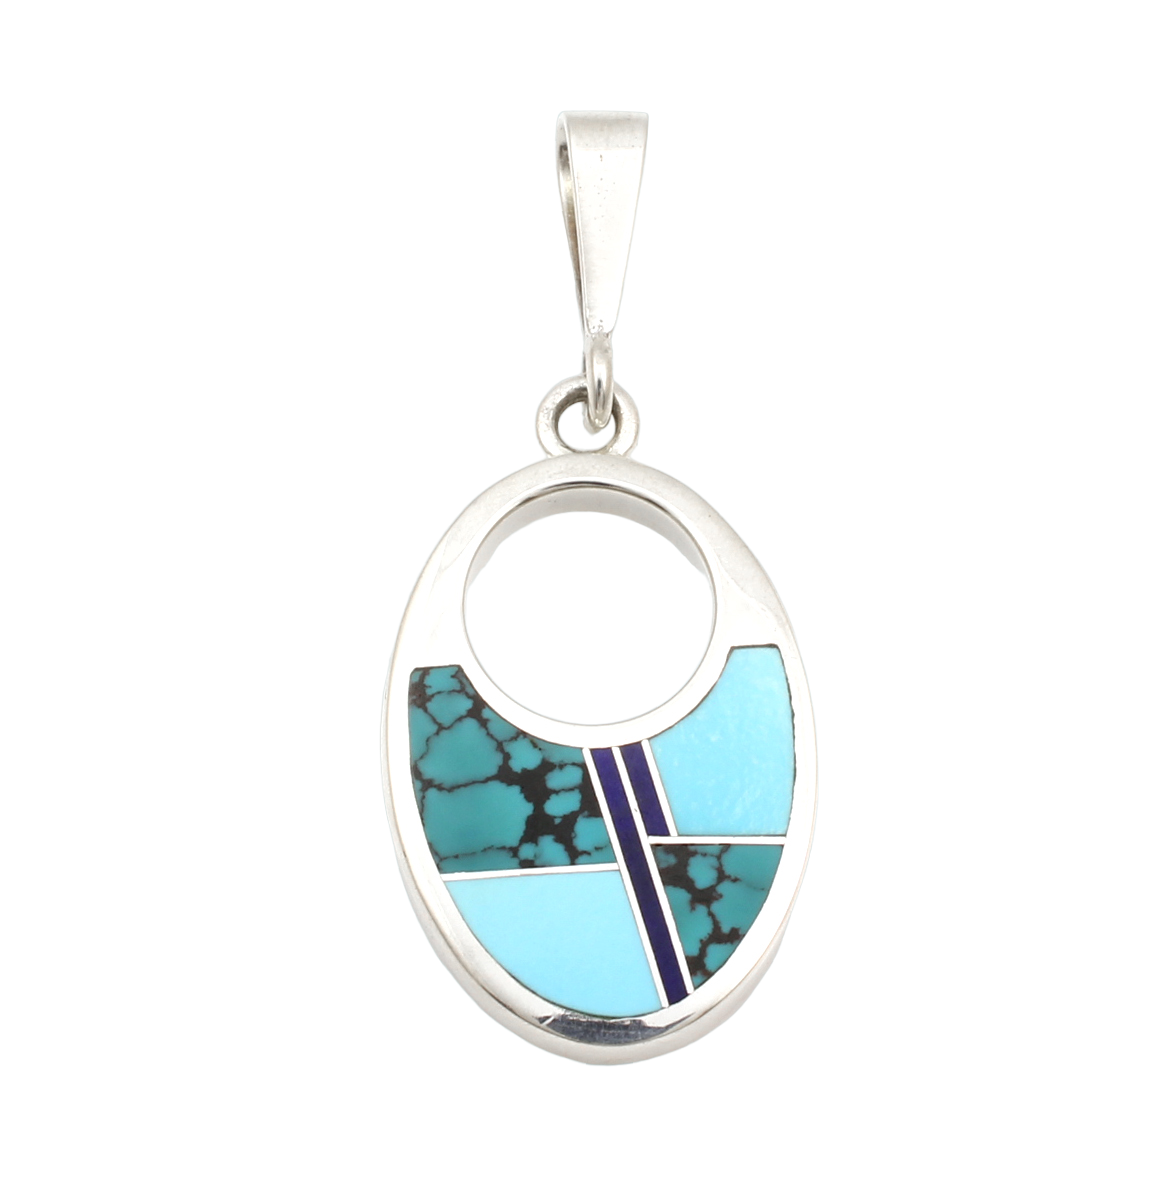 Reversible Oval Pendant-Jewelry-Ray Tracey-Sorrel Sky Gallery